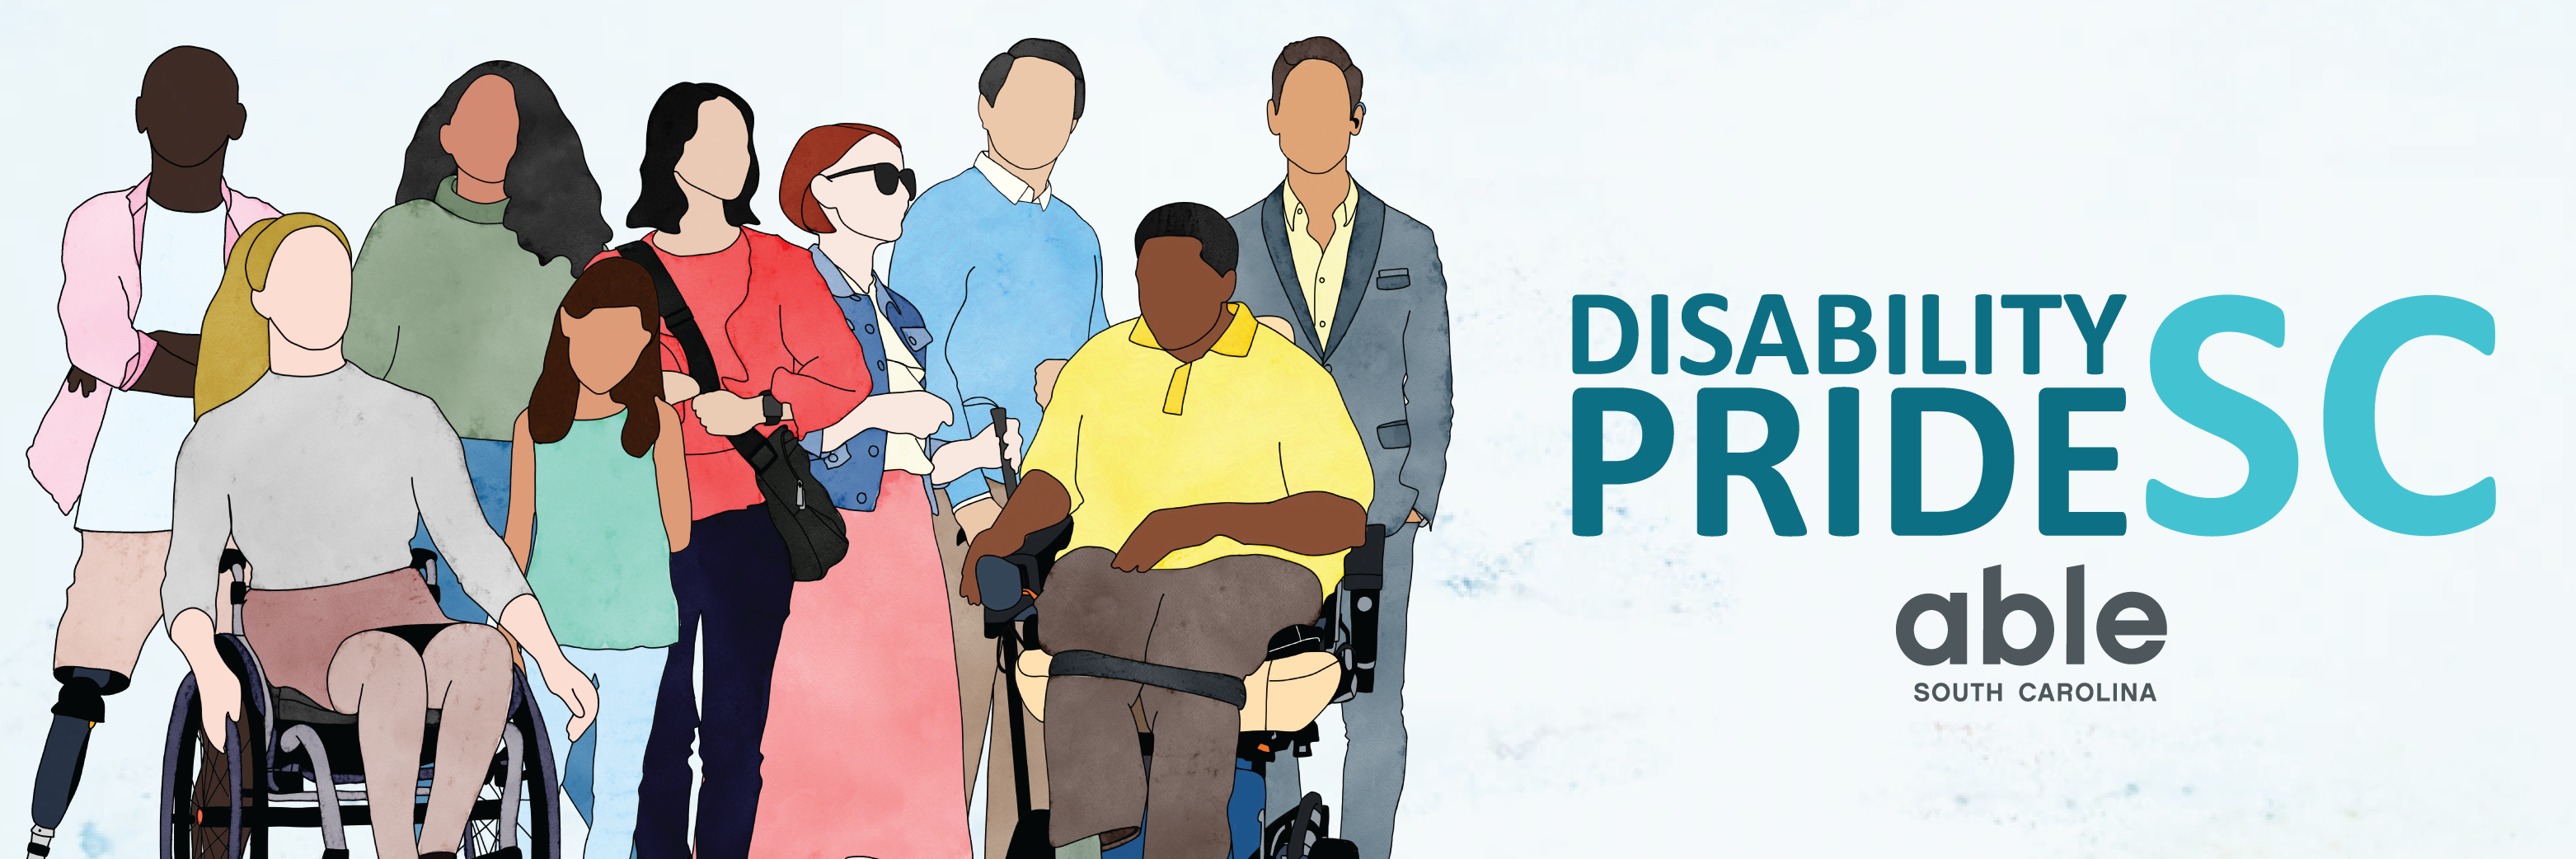 A very faint blue marbled background with an illustration of nine people of different races, ages, disabilities, personal styles, etc. To the right of the illustration is large teal text that says 'Disability Pride SC' with the Able SC logo underneath